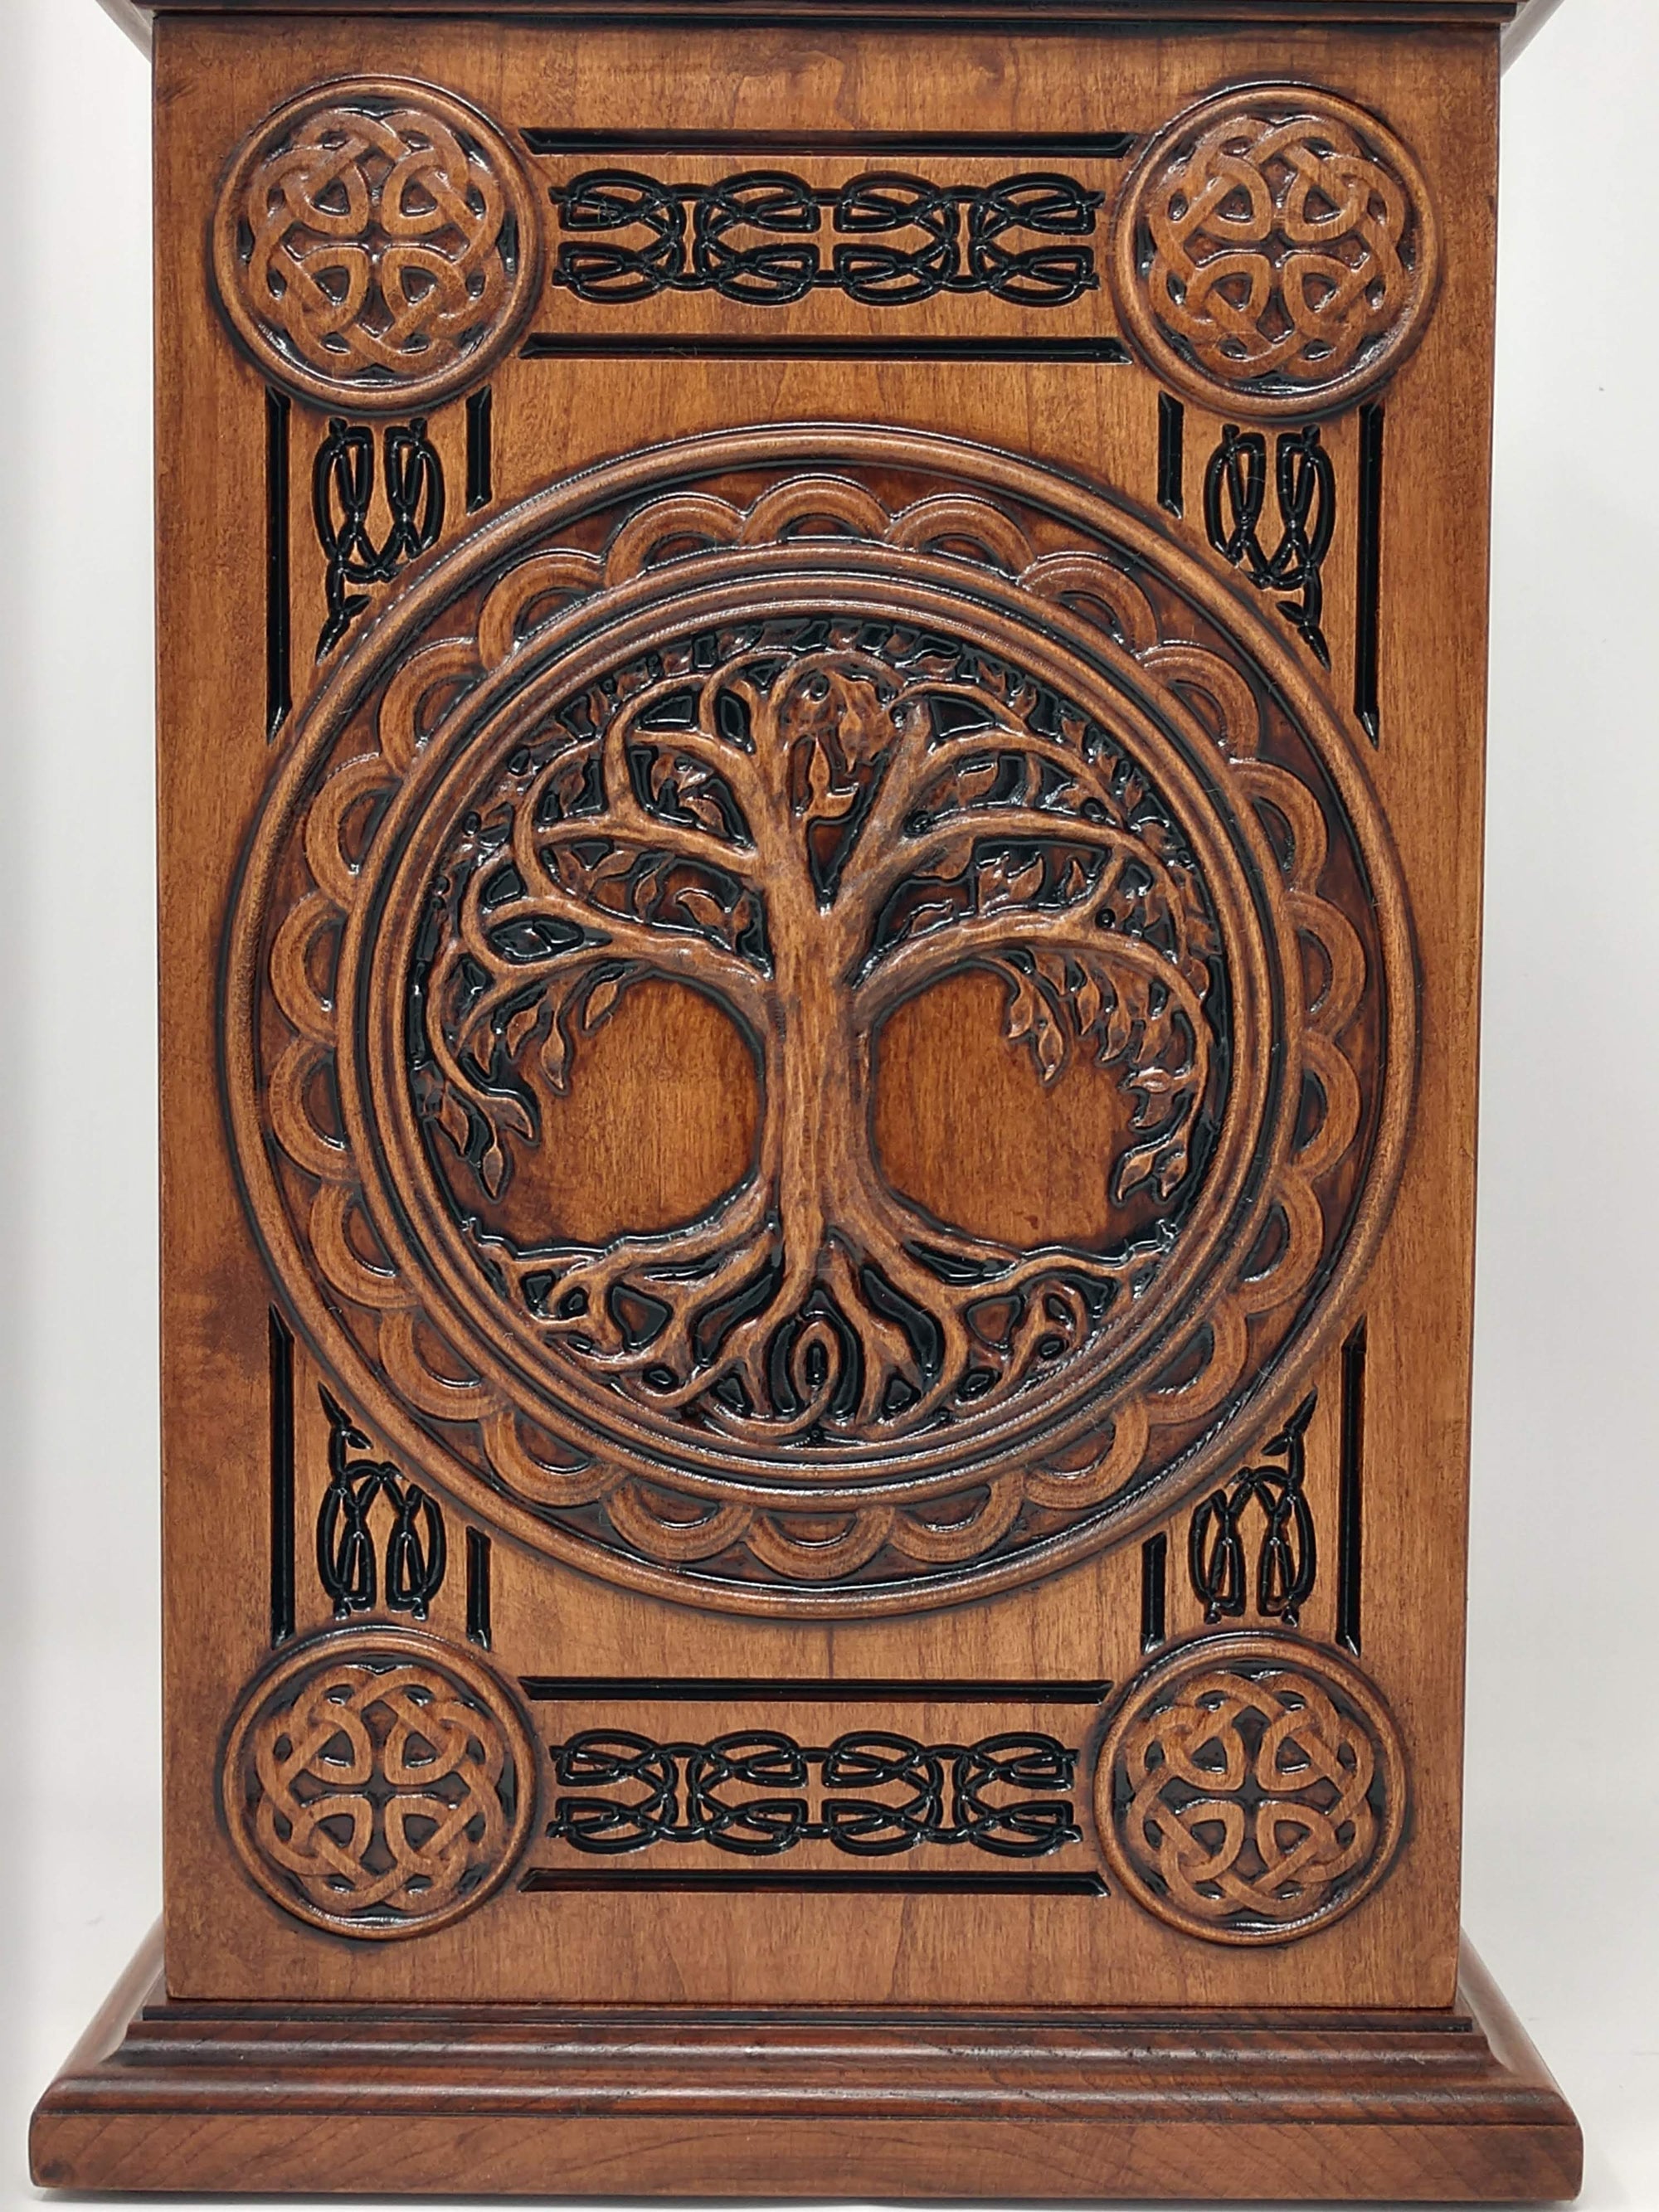 Close up of the Celtic Tree of Life carving and ornate boarders for the urns cremation urns